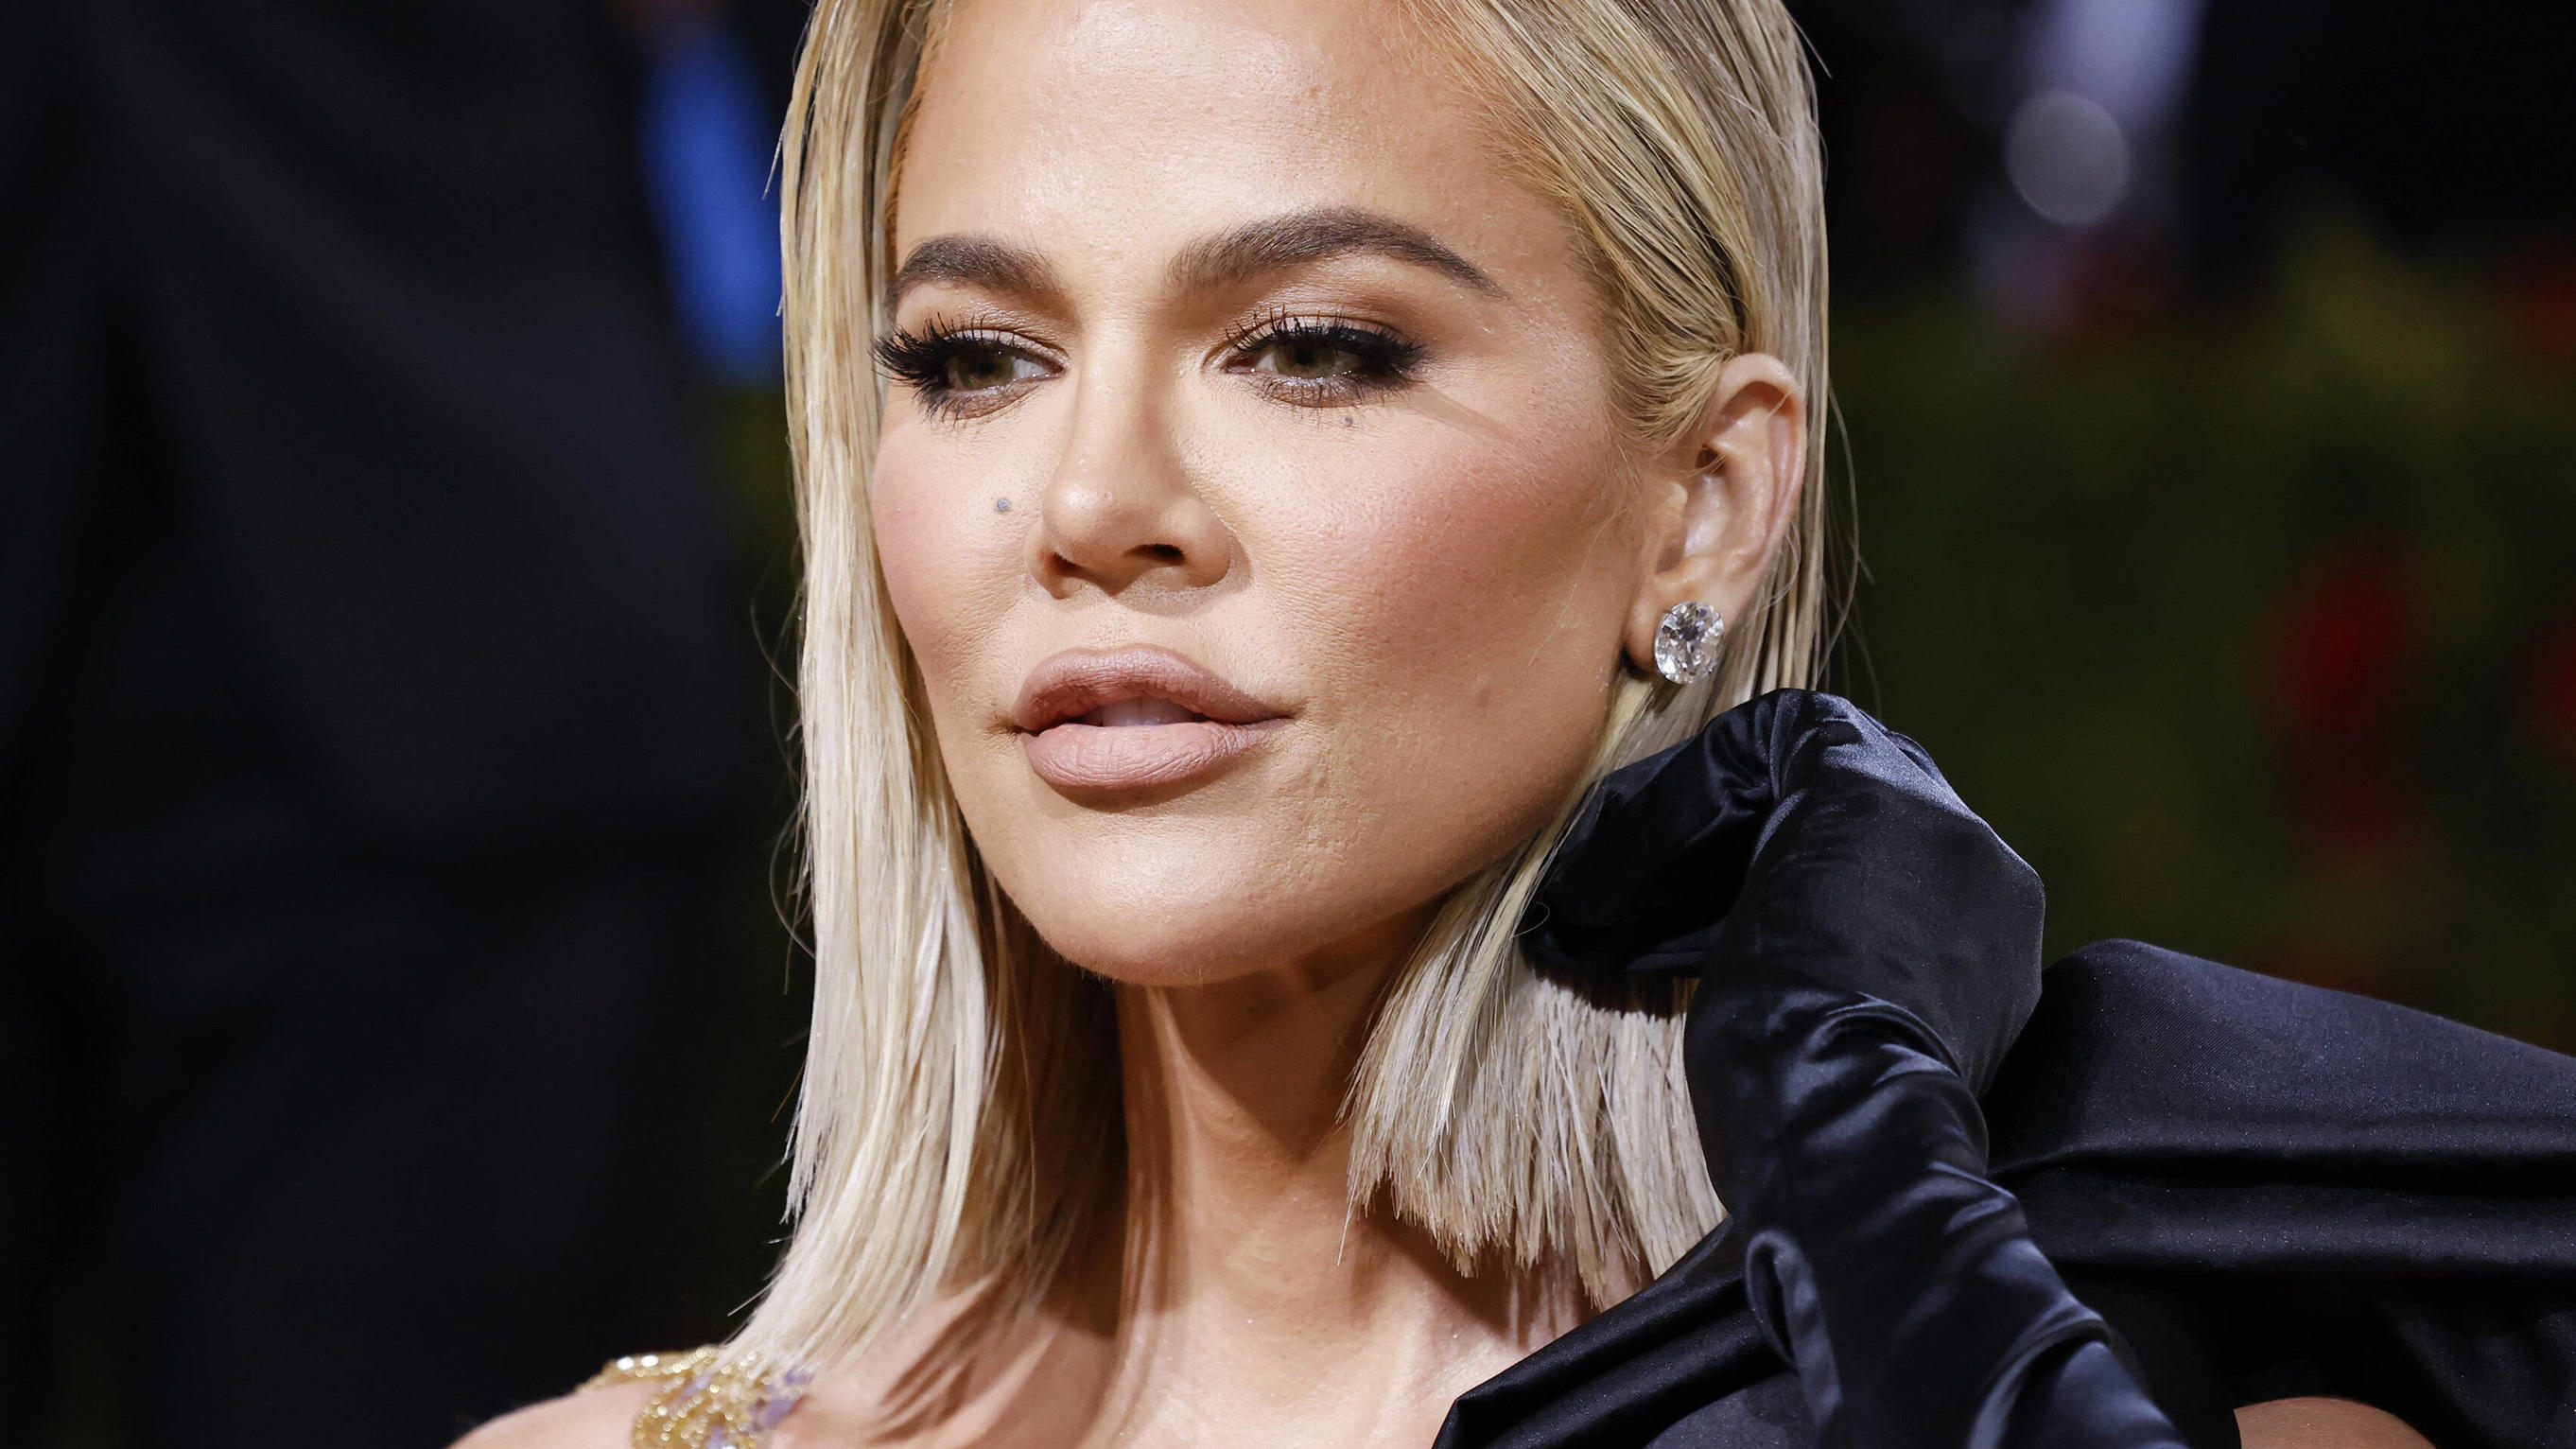  Khloe Kardashian arrives on the red carpet for The Met Gala at The Metropolitan Museum of Art celebrating the Costume Institute opening of In America: An Anthology of Fashion in New York City on Monday, May 2, 2022. PUBLICATIONxINxGERxSUIxAUTxHUNxON